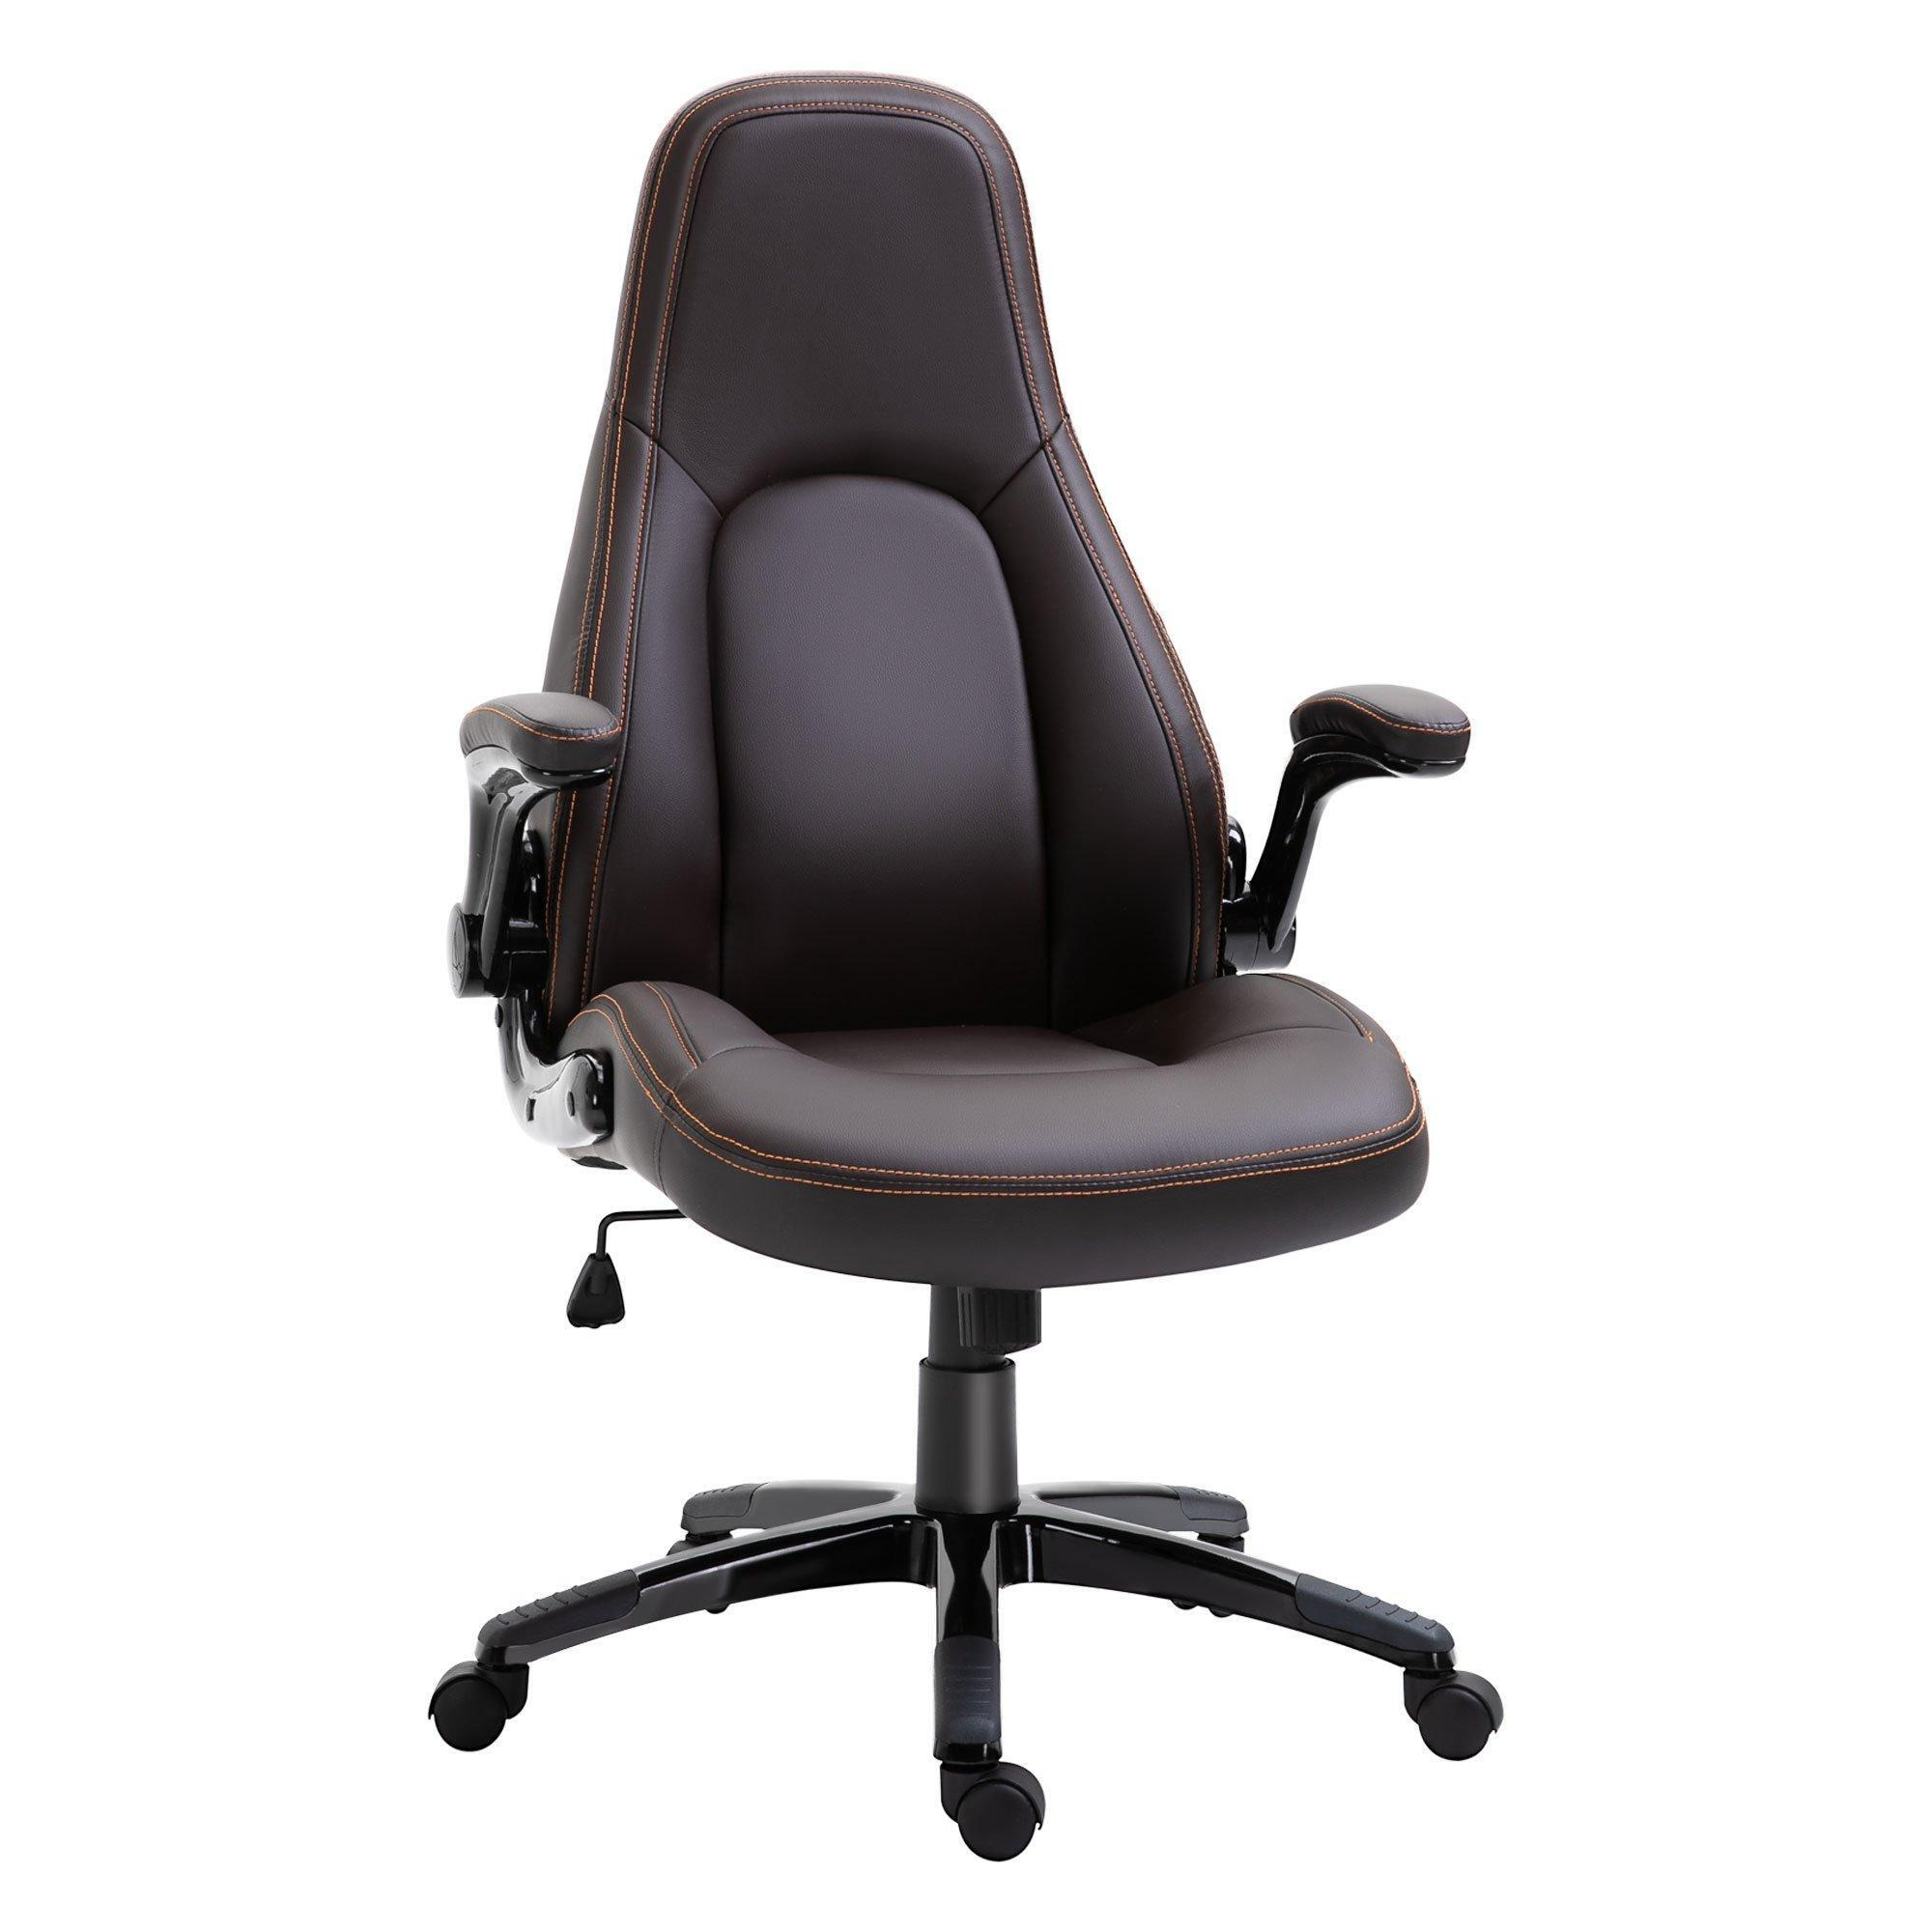 PU Leather Office Chair High Back Swivel Office Chair Adjustable - image 1